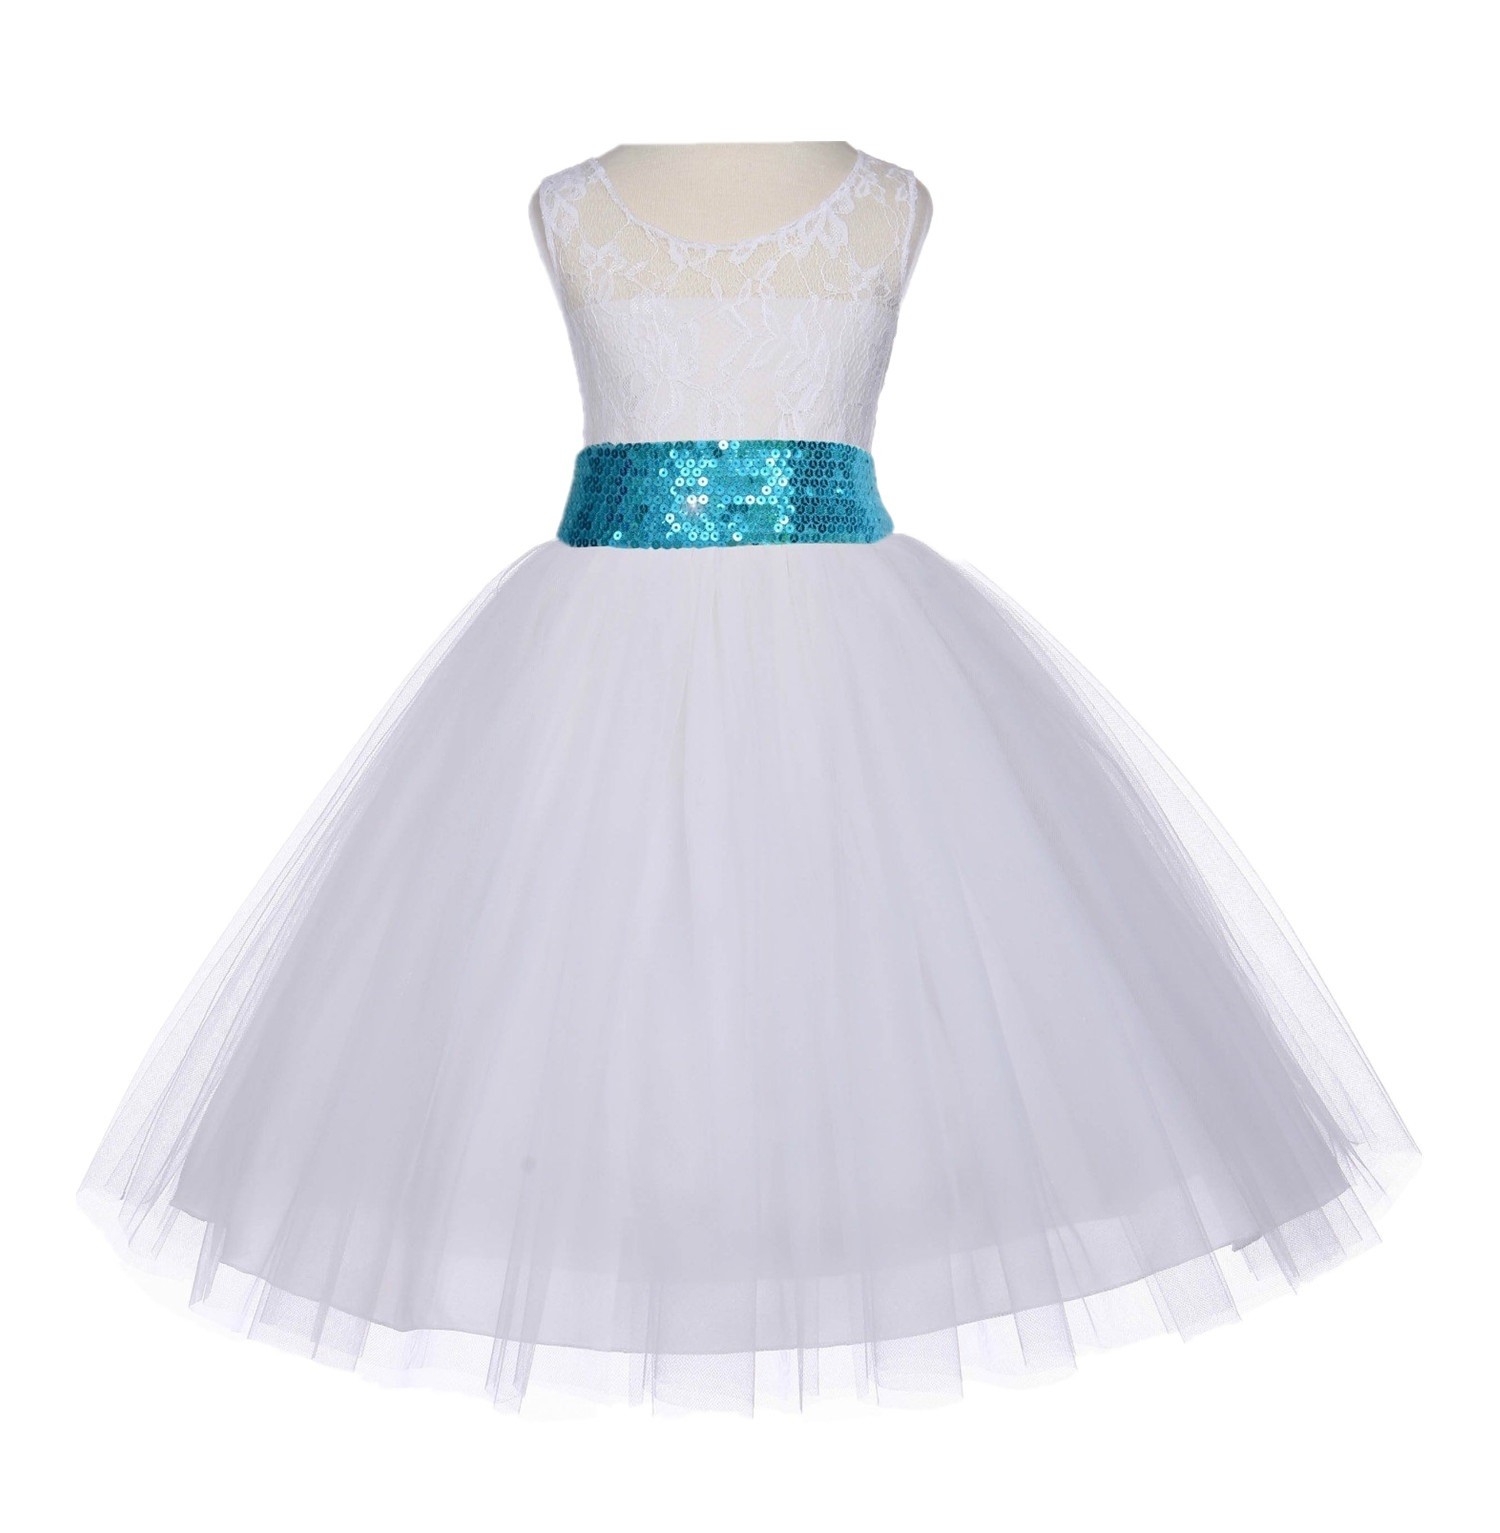 Ivory Floral Lace Bodice Tulle Turquoise Sequin Flower Girl Dress 153mh